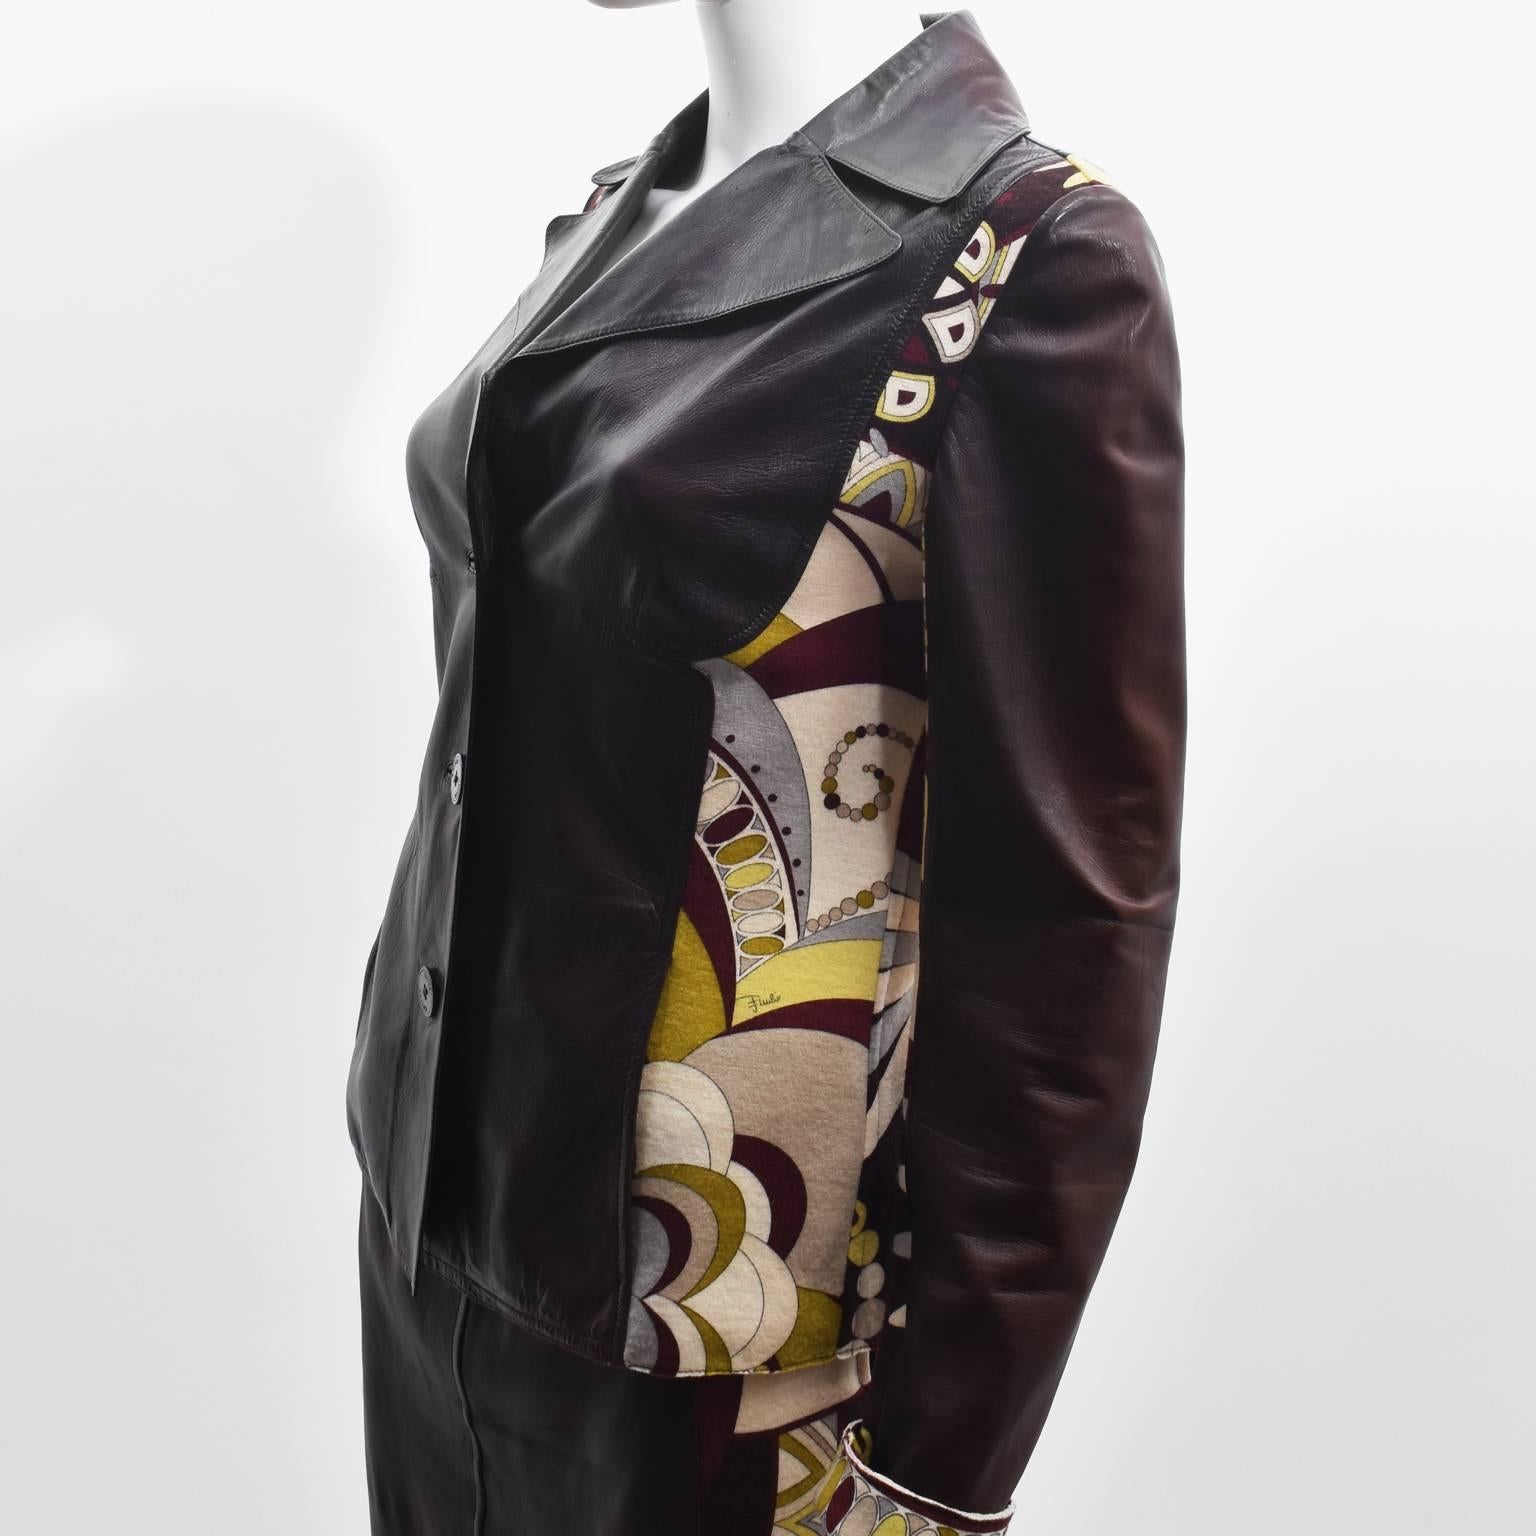 Women's Emilio Pucci Brown Leather and Wool  Pucci Print Jacket and Skirt Suit For Sale